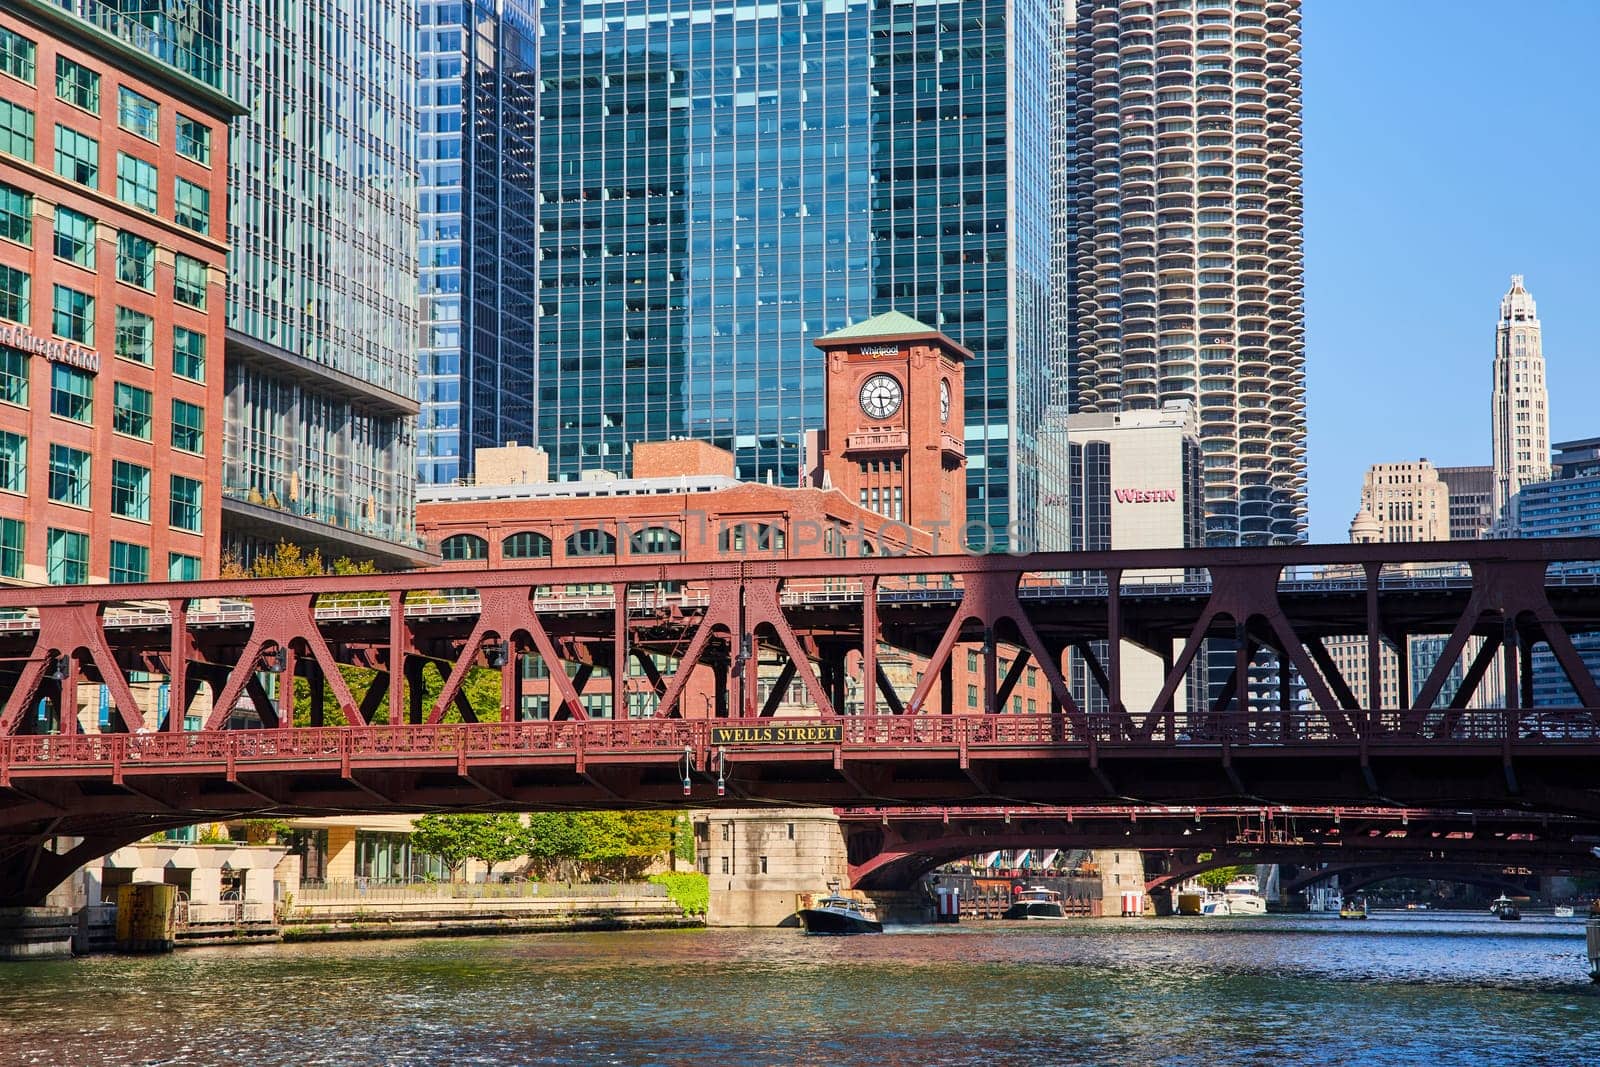 Image of Red iron bridge over Chicago canal with skyscrapers, hotels, and parking garage in summer